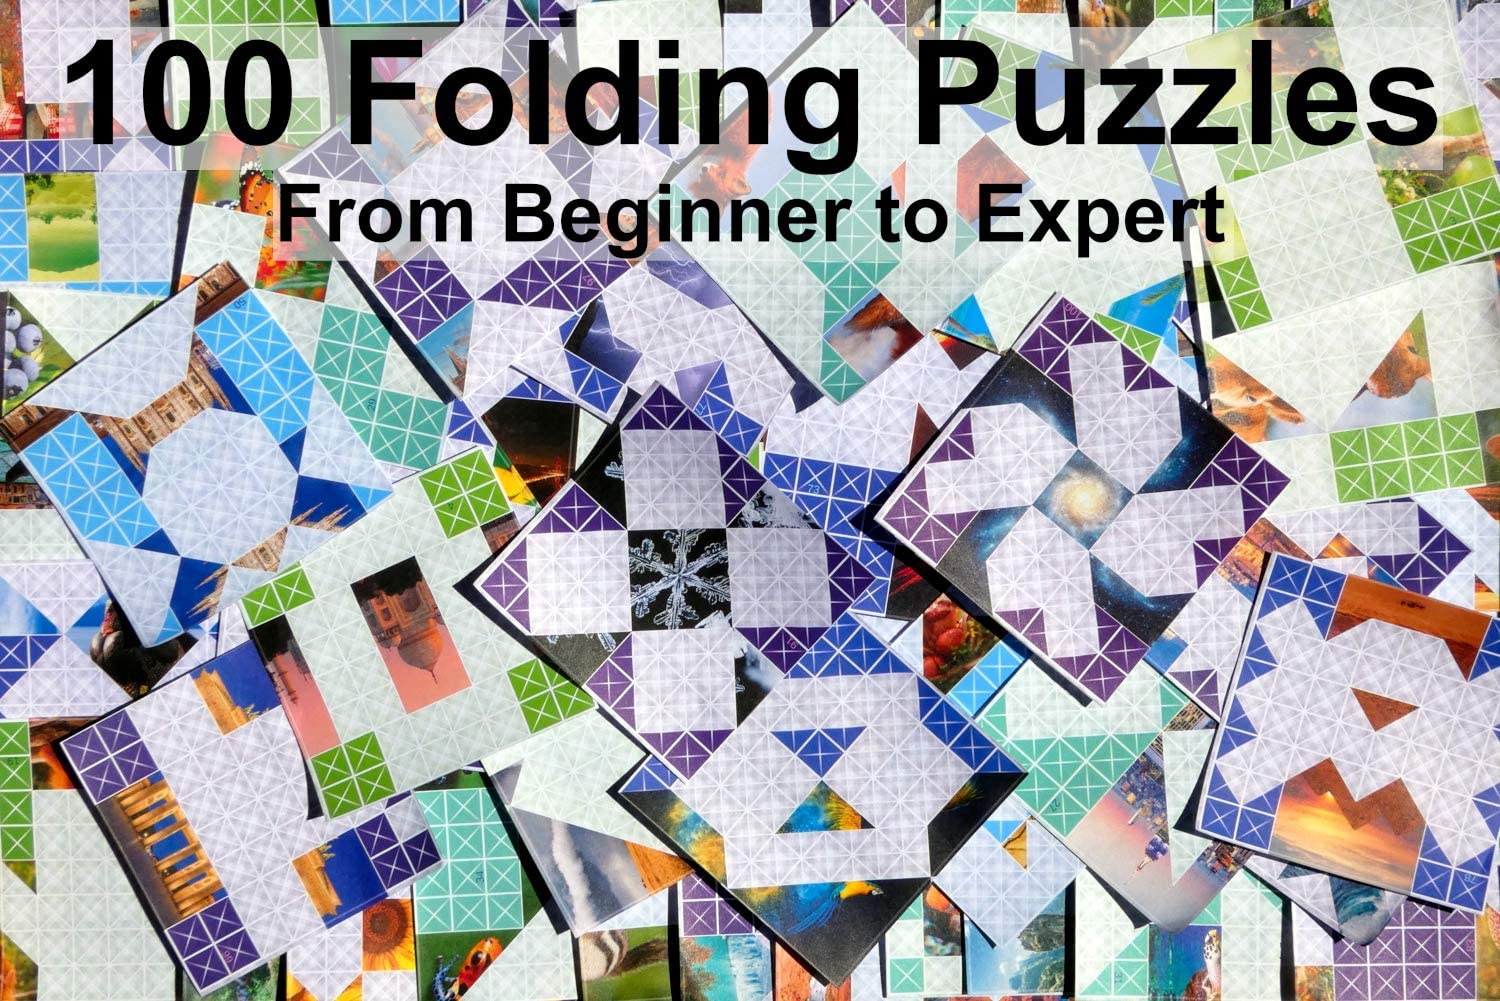 A large number of origami puzzles from Foldology. There is text which says, '100 folding puzzles from beginner to expert.'